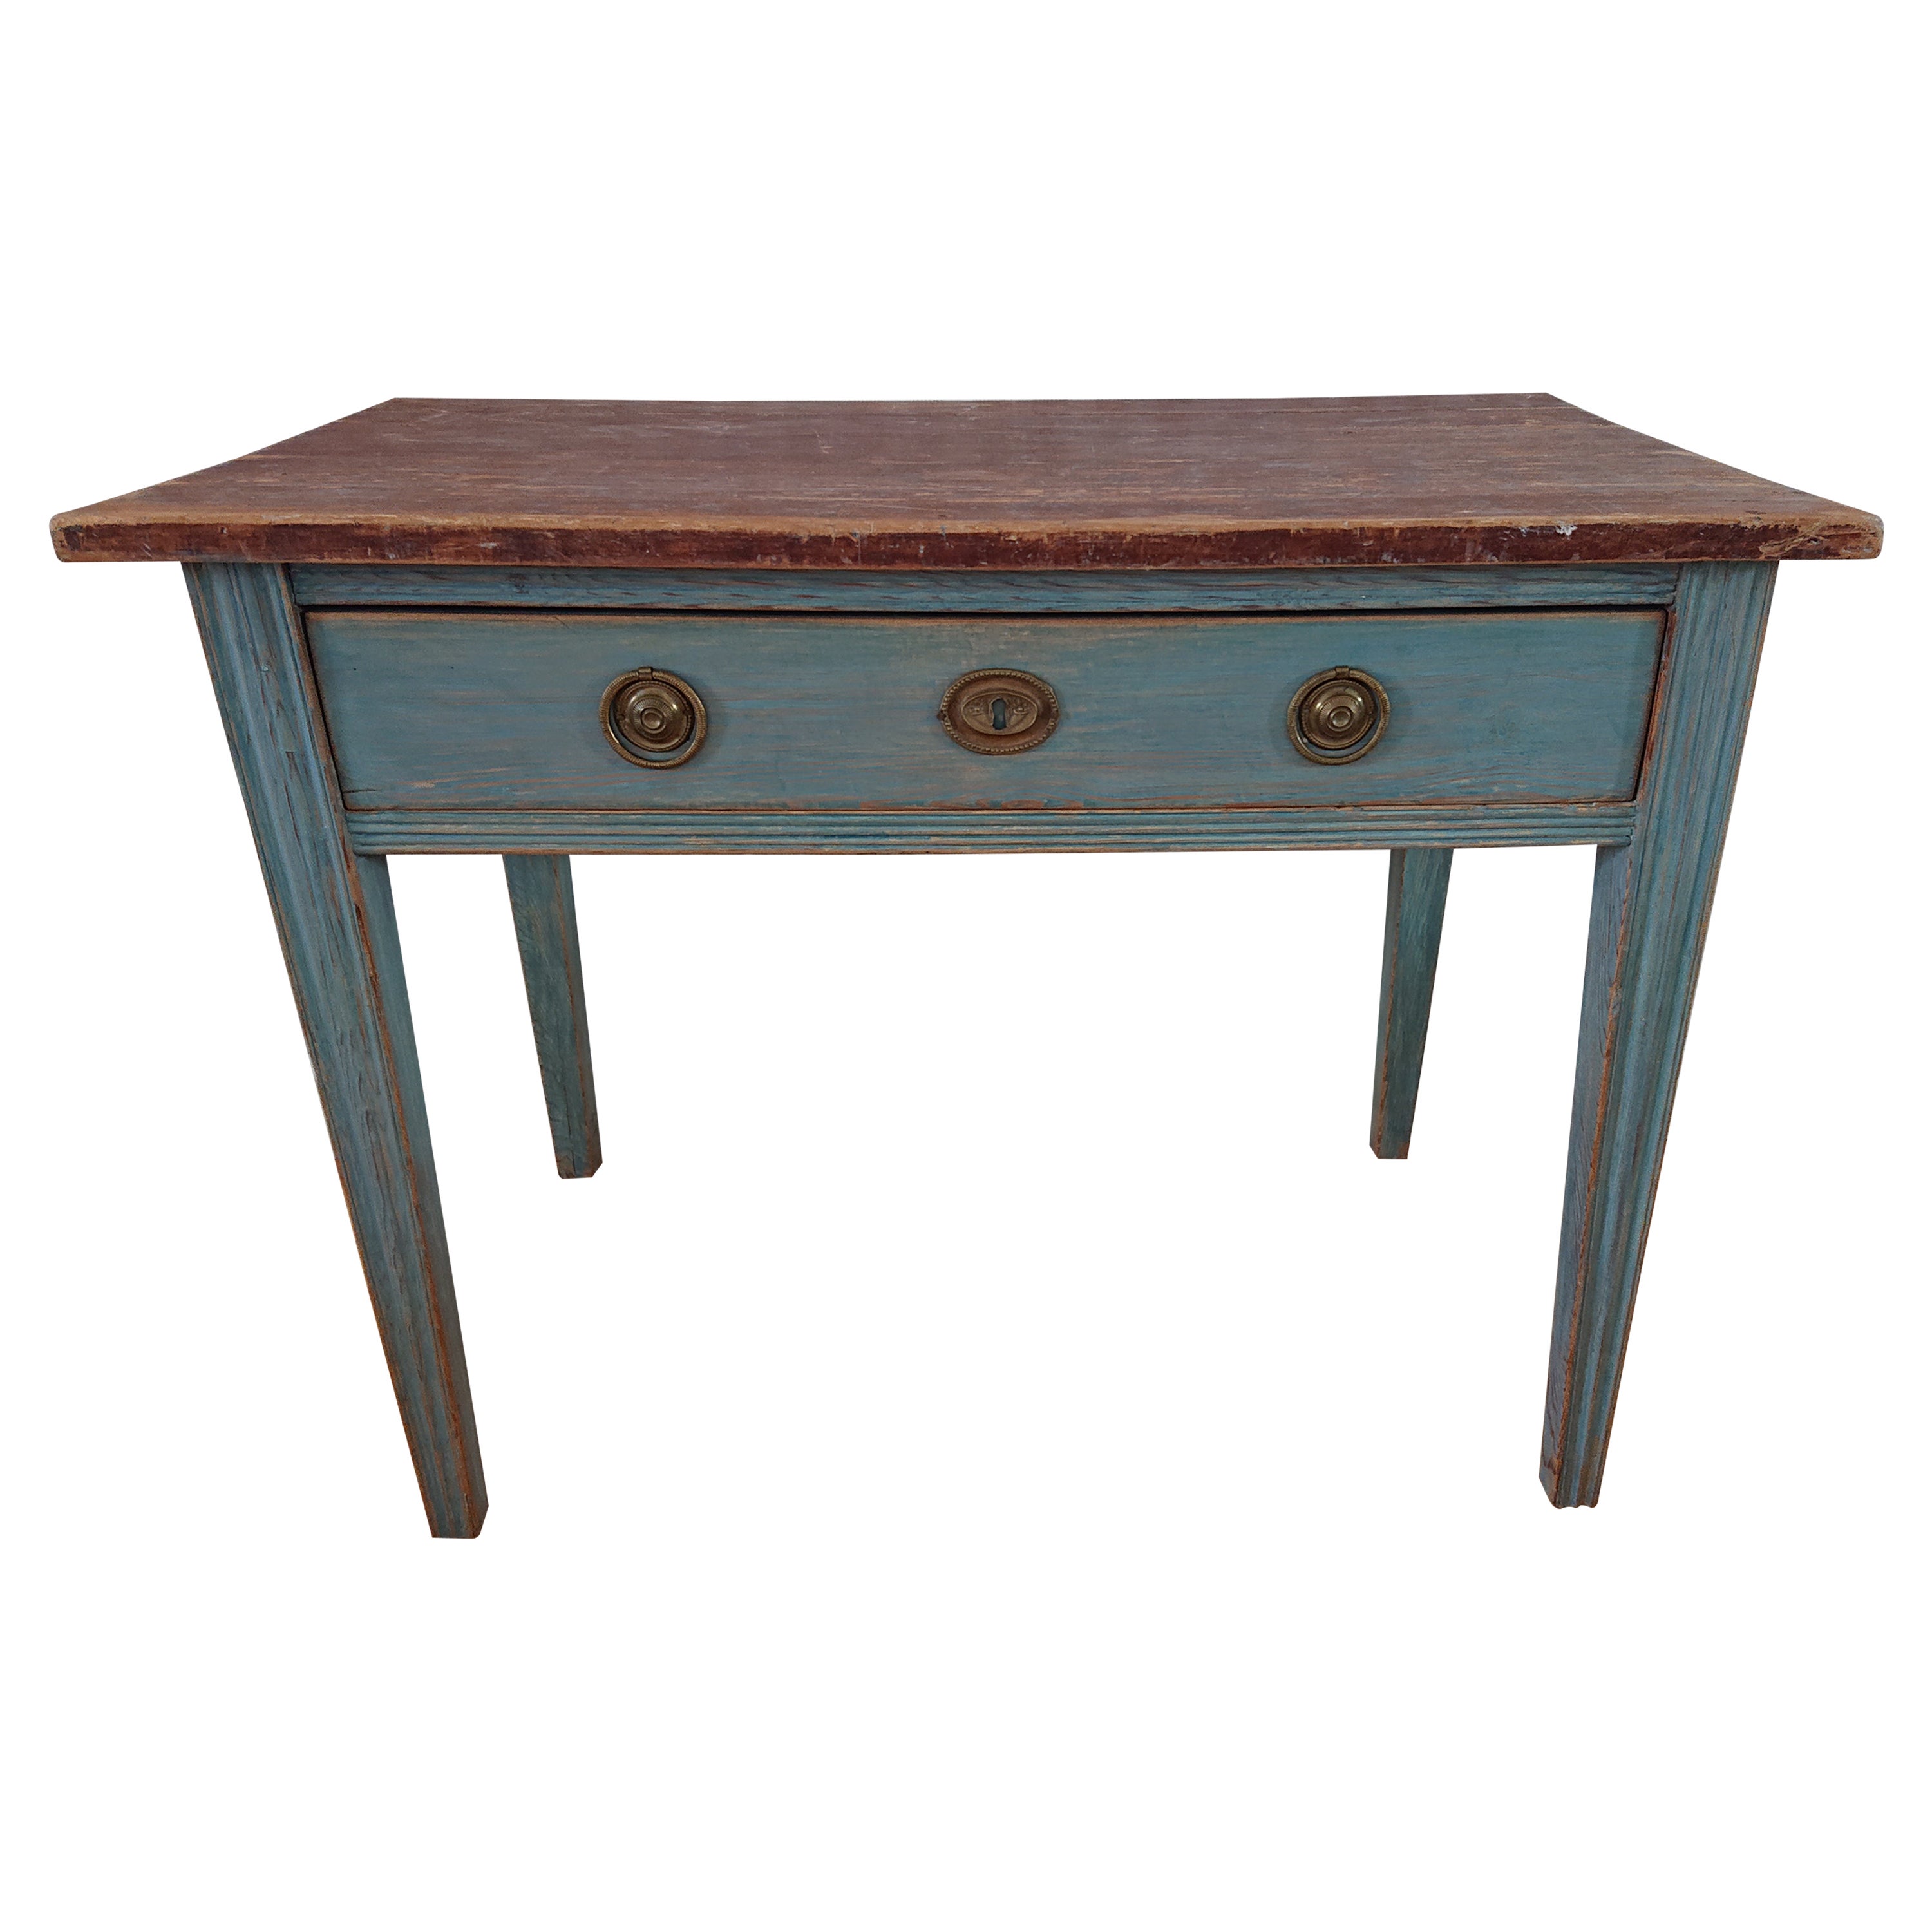 Early 19th Century Swedish  antique  rustic Gustavian Desk with Original Paint